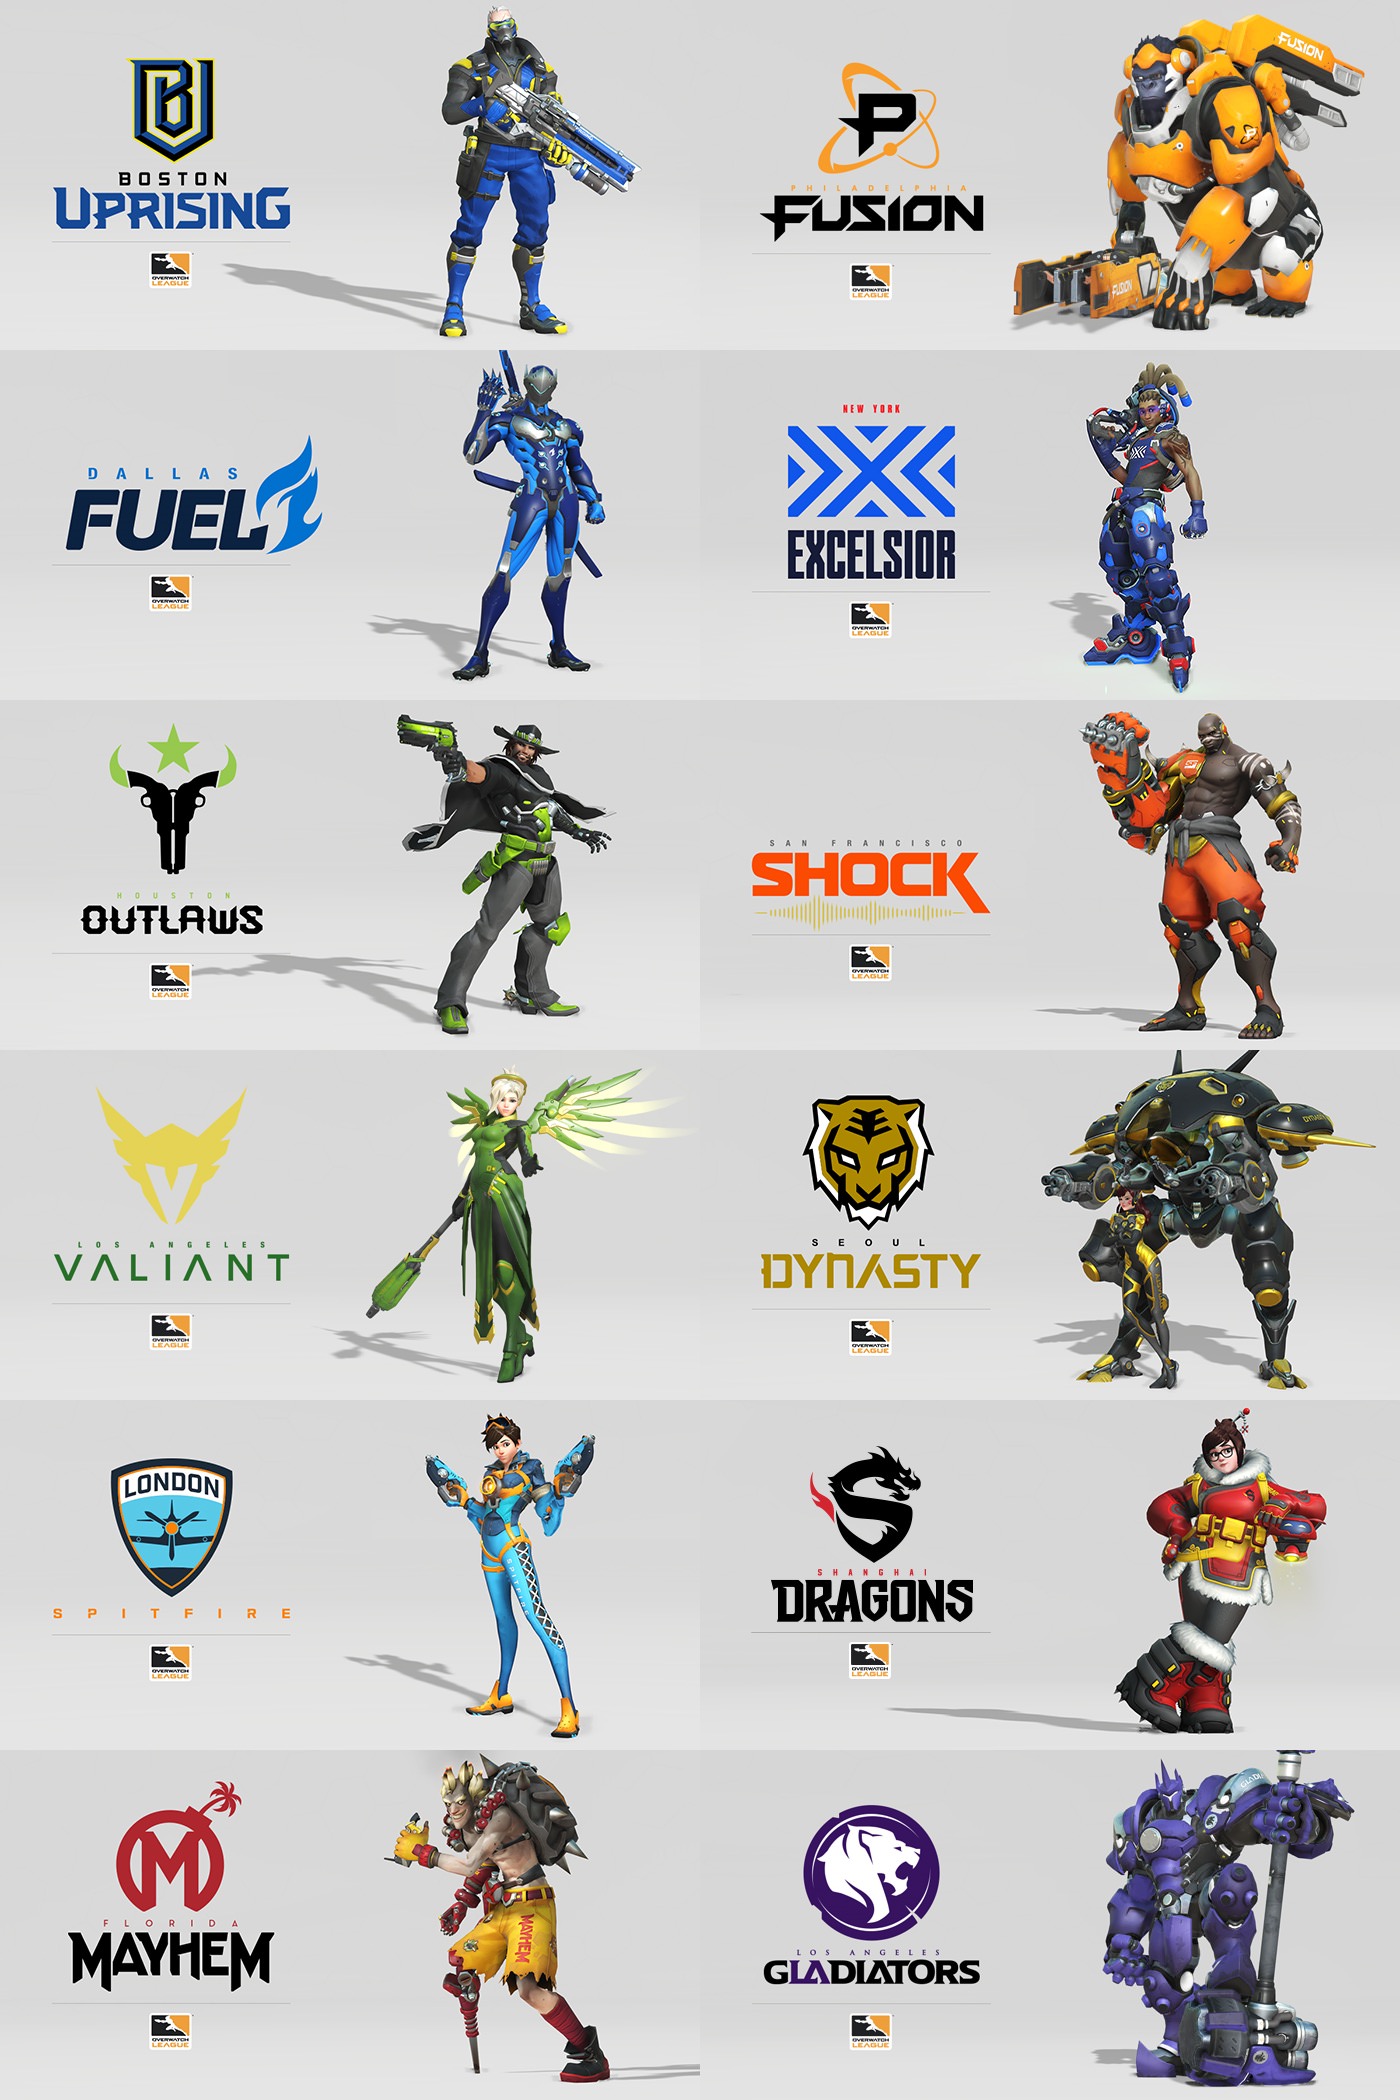 overwatch league tokens free